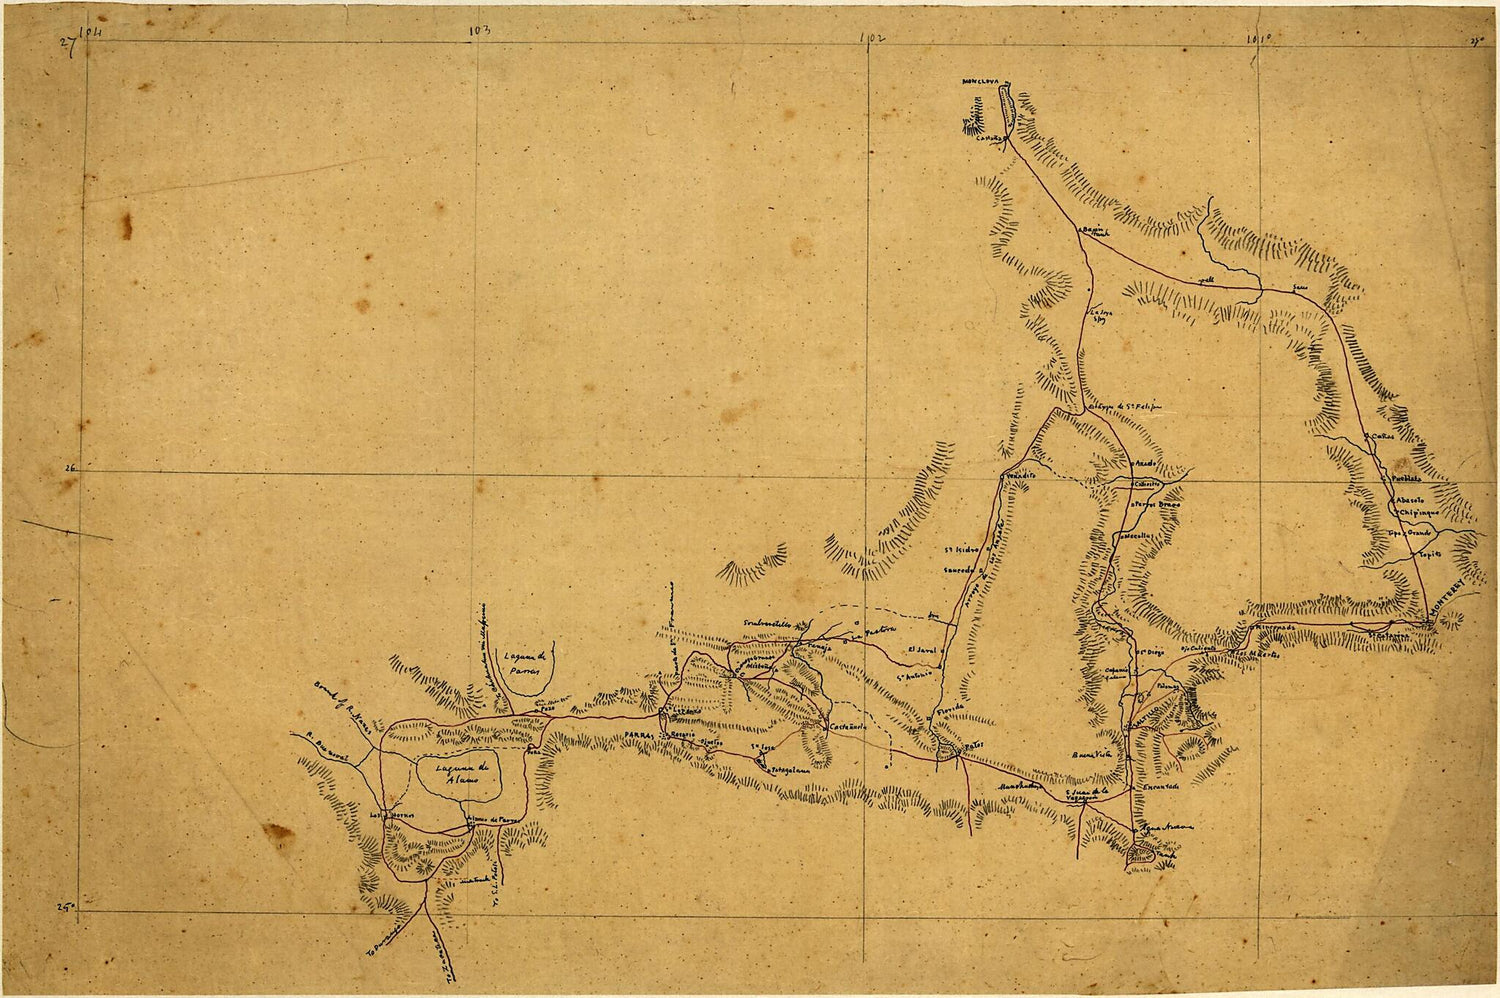 This old map of Sketch of Area of Northeastern Mexico Bounded by Monclova, Monterrey, Saltillo, and Parras from 1846 was created by Joseph Goldsborough Bruff in 1846